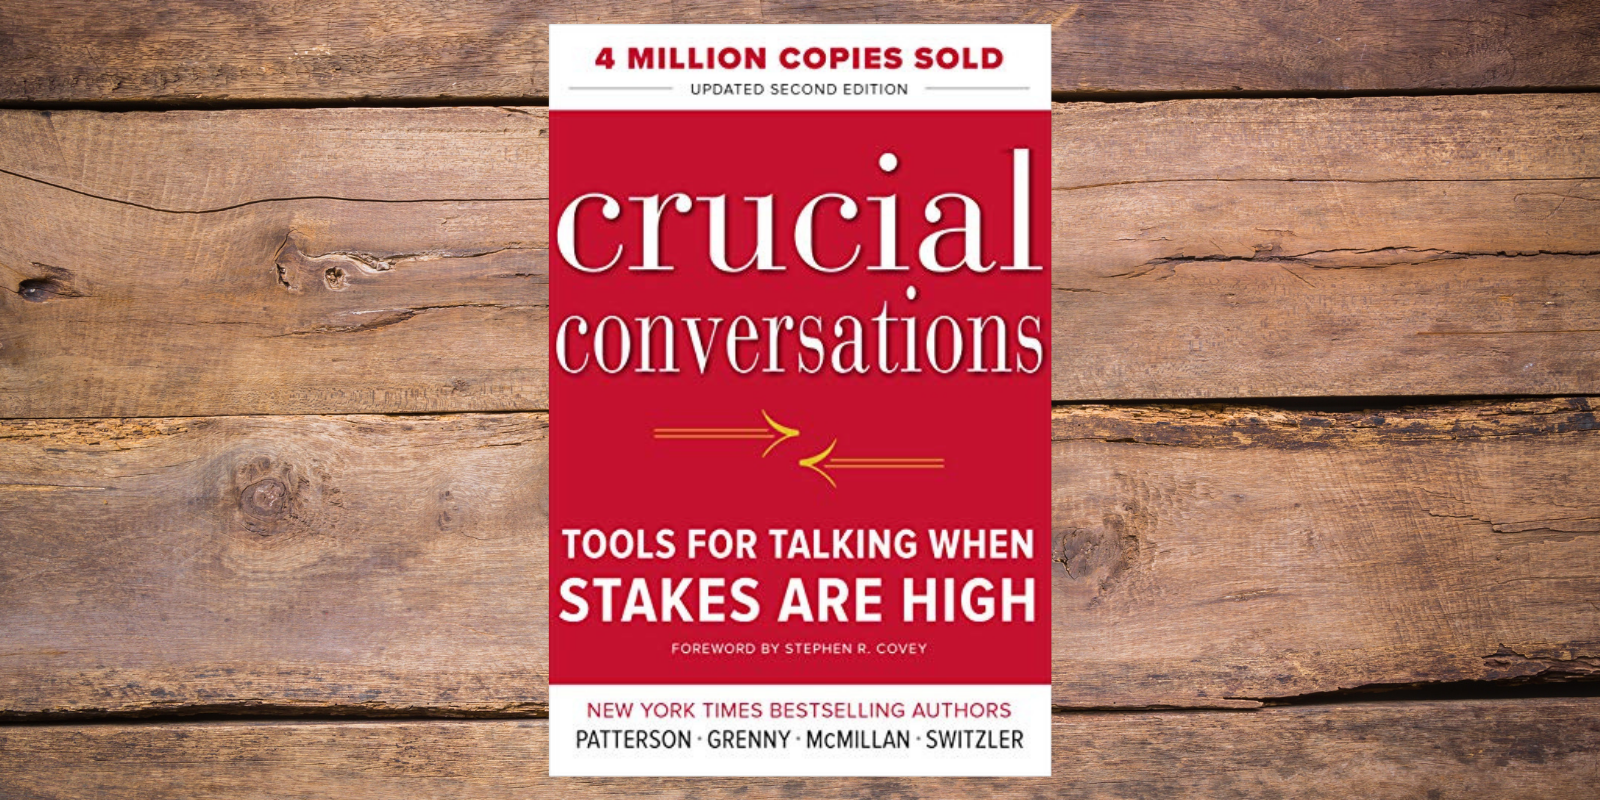 On Reading “Crucial Conversations”